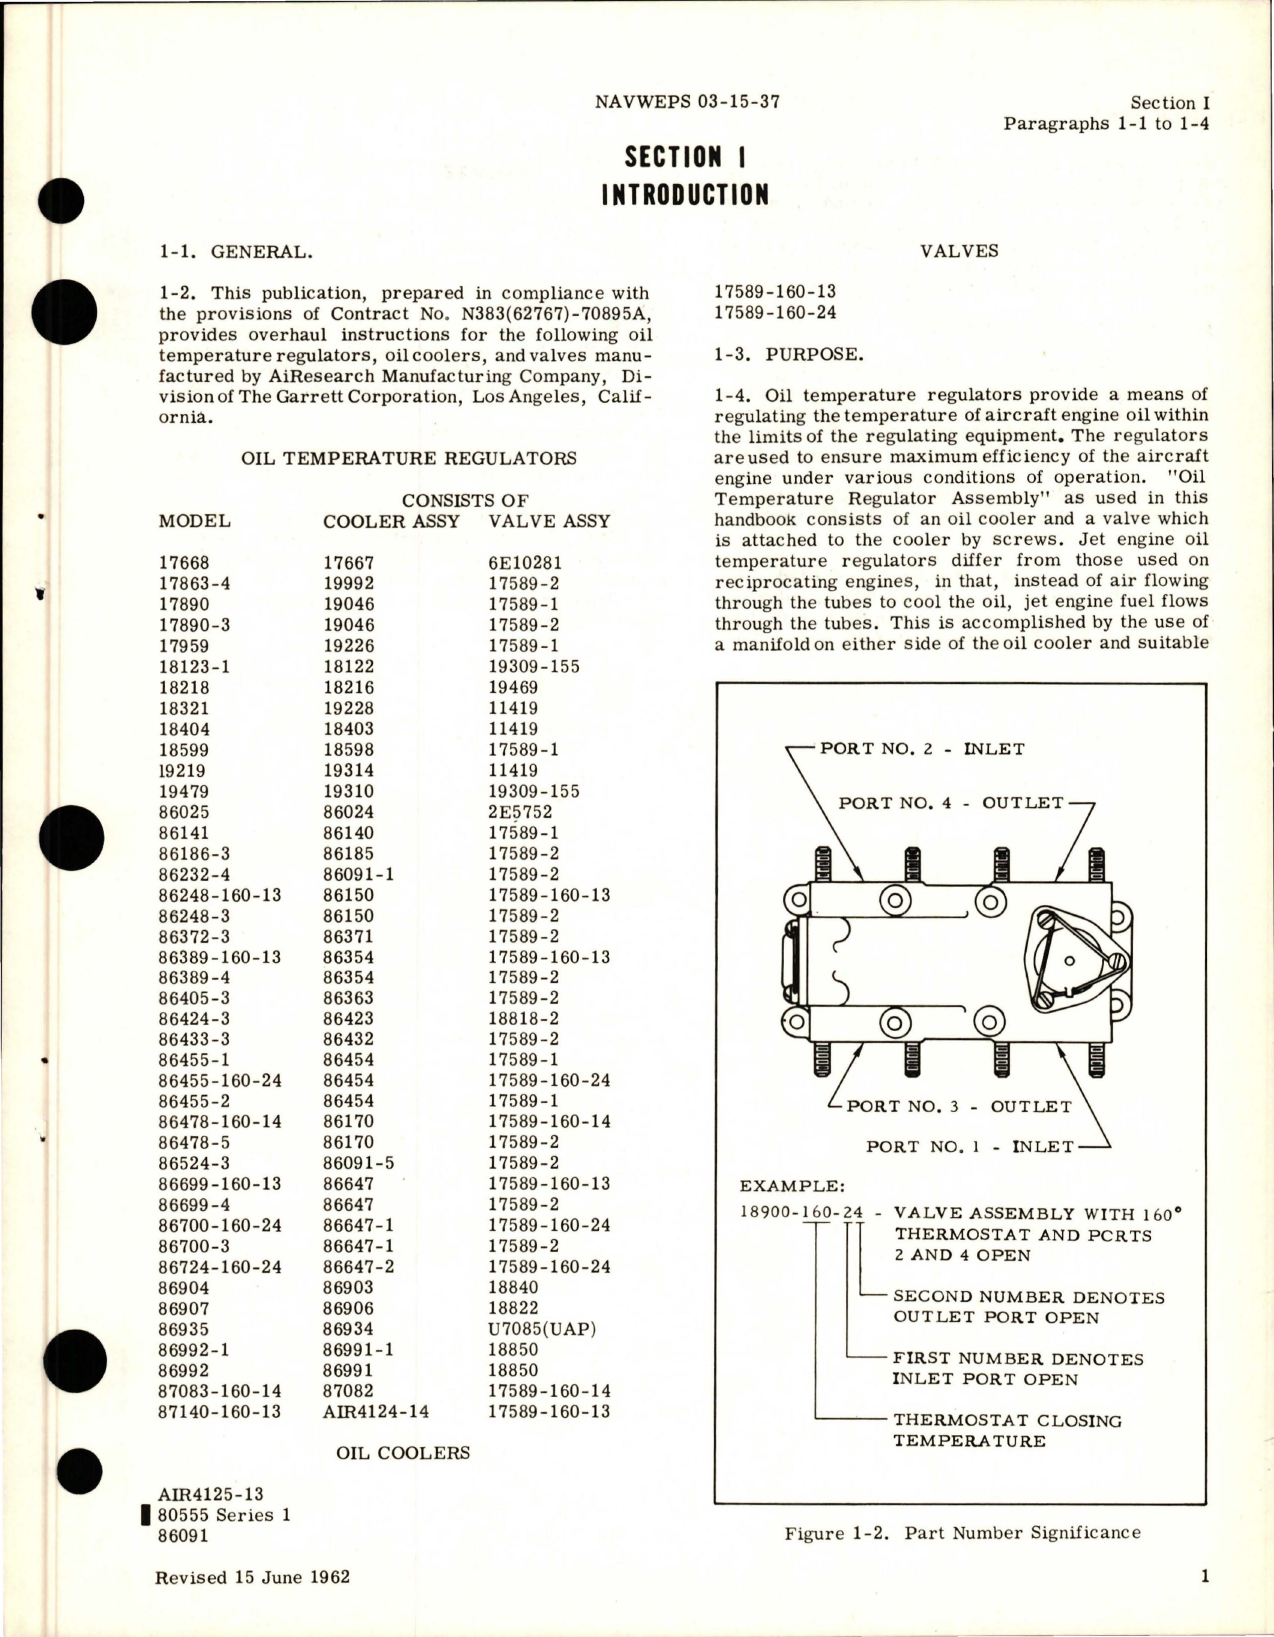 Sample page 5 from AirCorps Library document: Overhaul Instructions for Oil Temperature Regulators Oil Coolers Valves